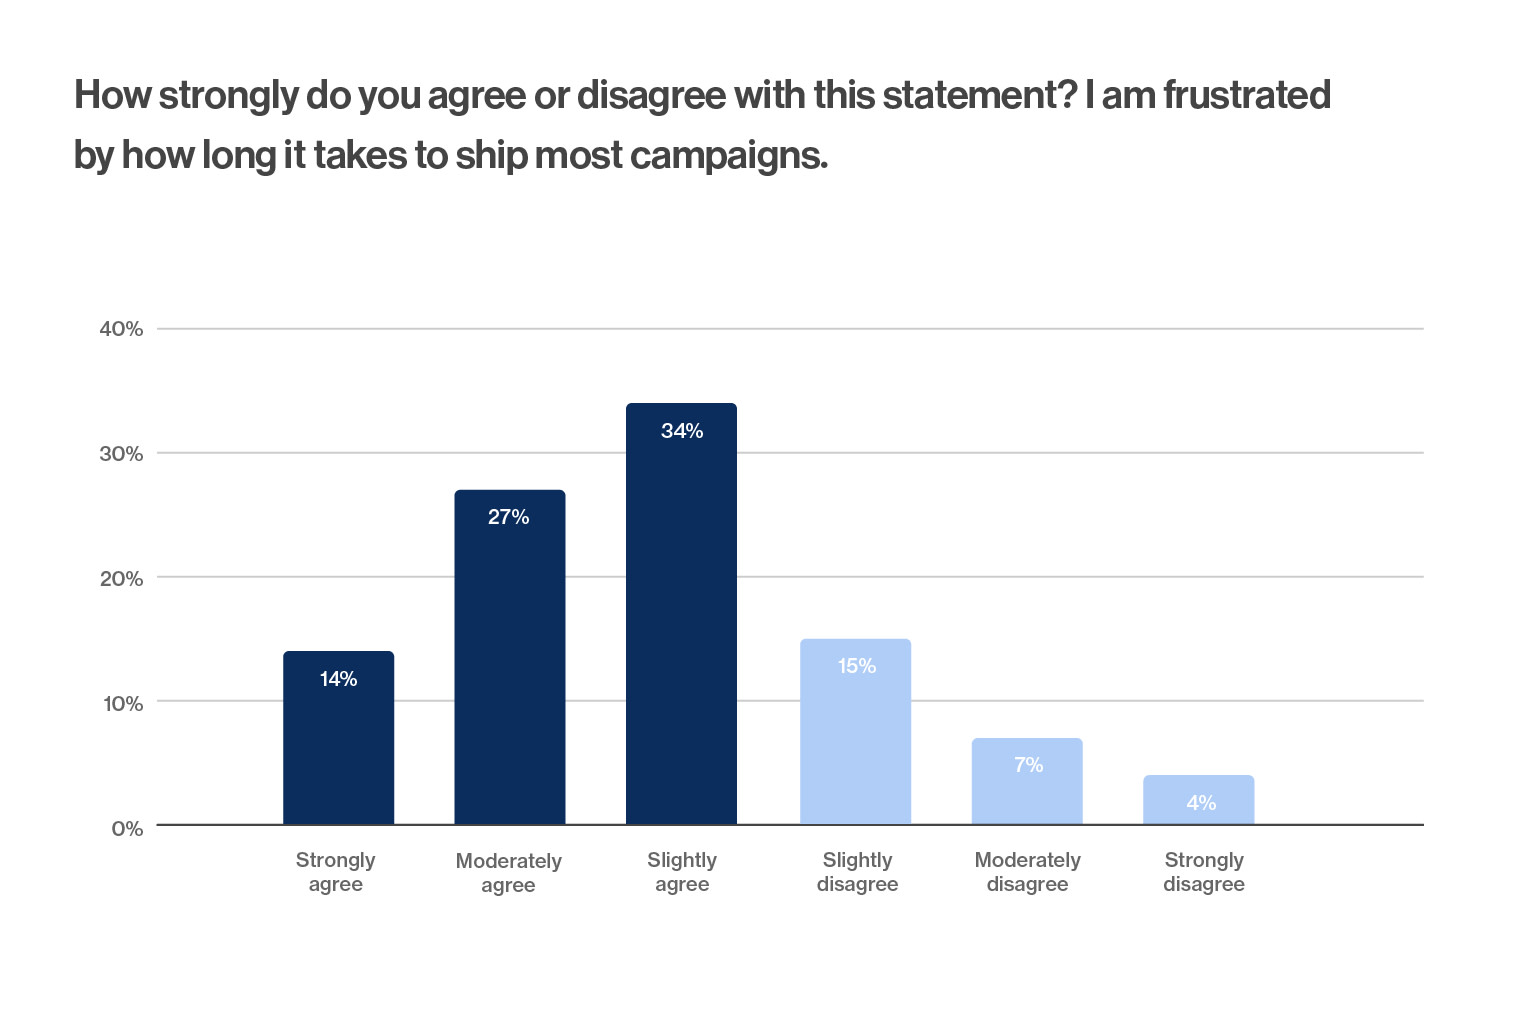 Survey question that reads: How strongly do you agree or disagree with this statement? I'm frustrated by how long it takes to ship most campaigns. Answer breakdown: 14% - Strongly agree; 27% - Moderately agree; 34% - Slightly agree; 15% - Slightly disagree; 7% - Moderately disagree; 4% - Strongly disagree